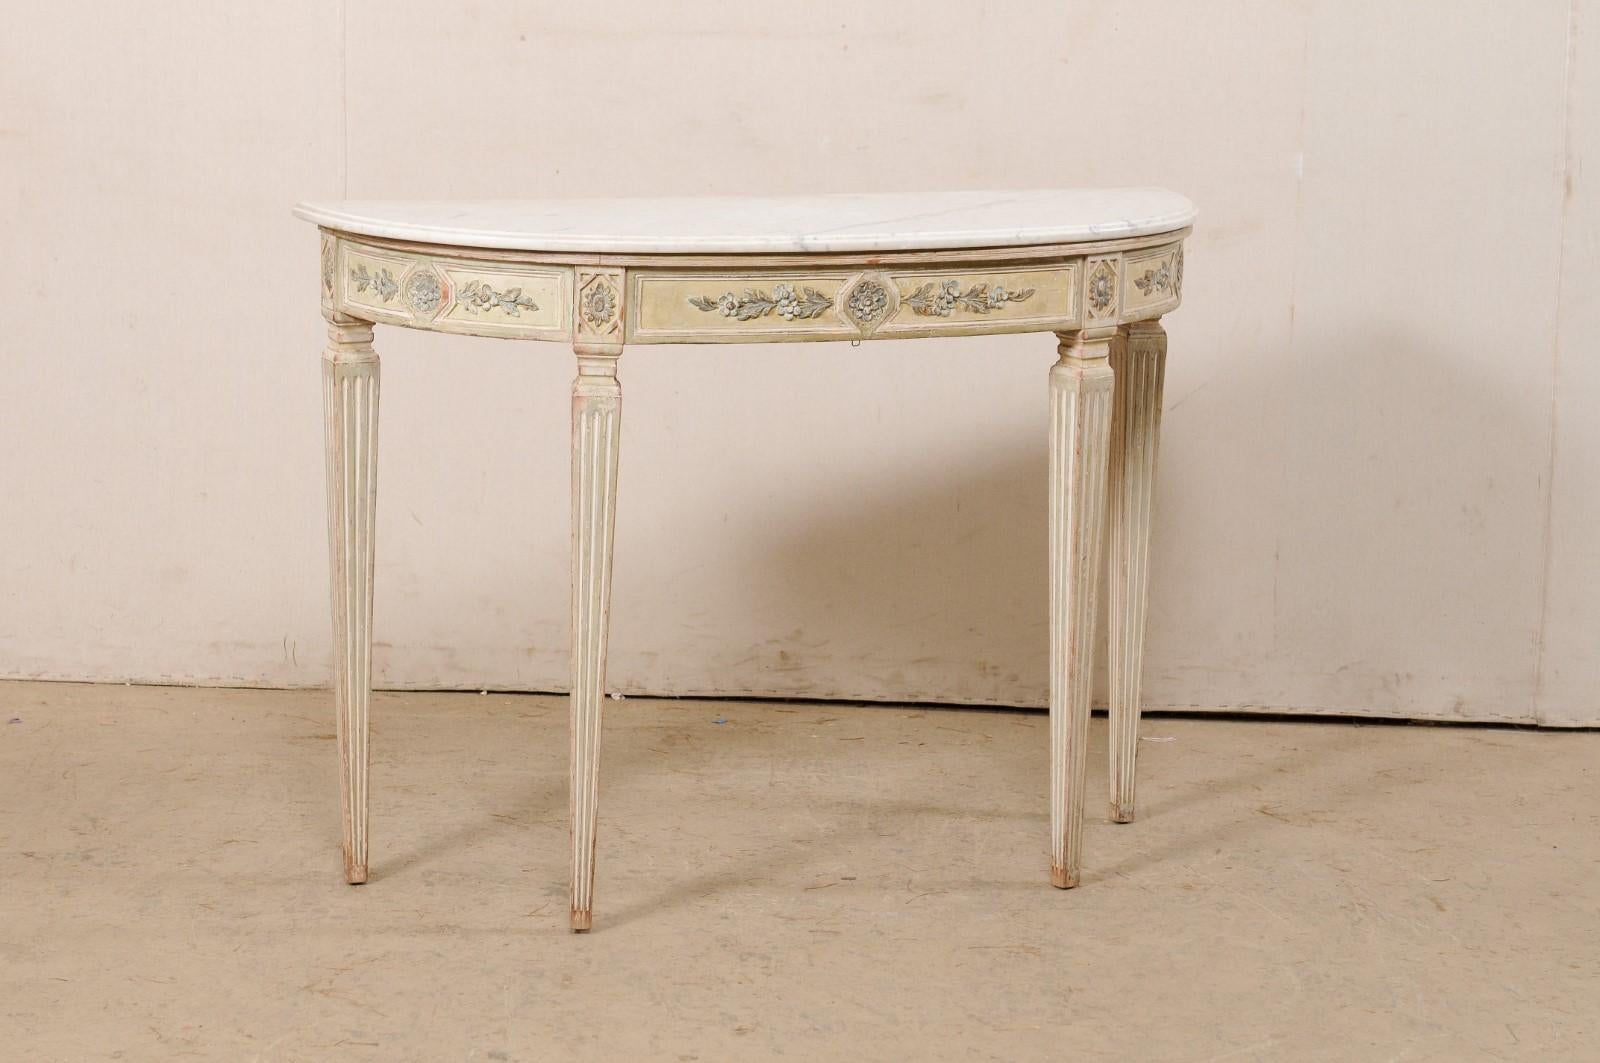 A French marble top carved-wood console table, with its original paint, from the mid 20th century. This vintage table from France has an oblong demilune shape with flat along the backside (so that it can rest comfortably against the wall). The